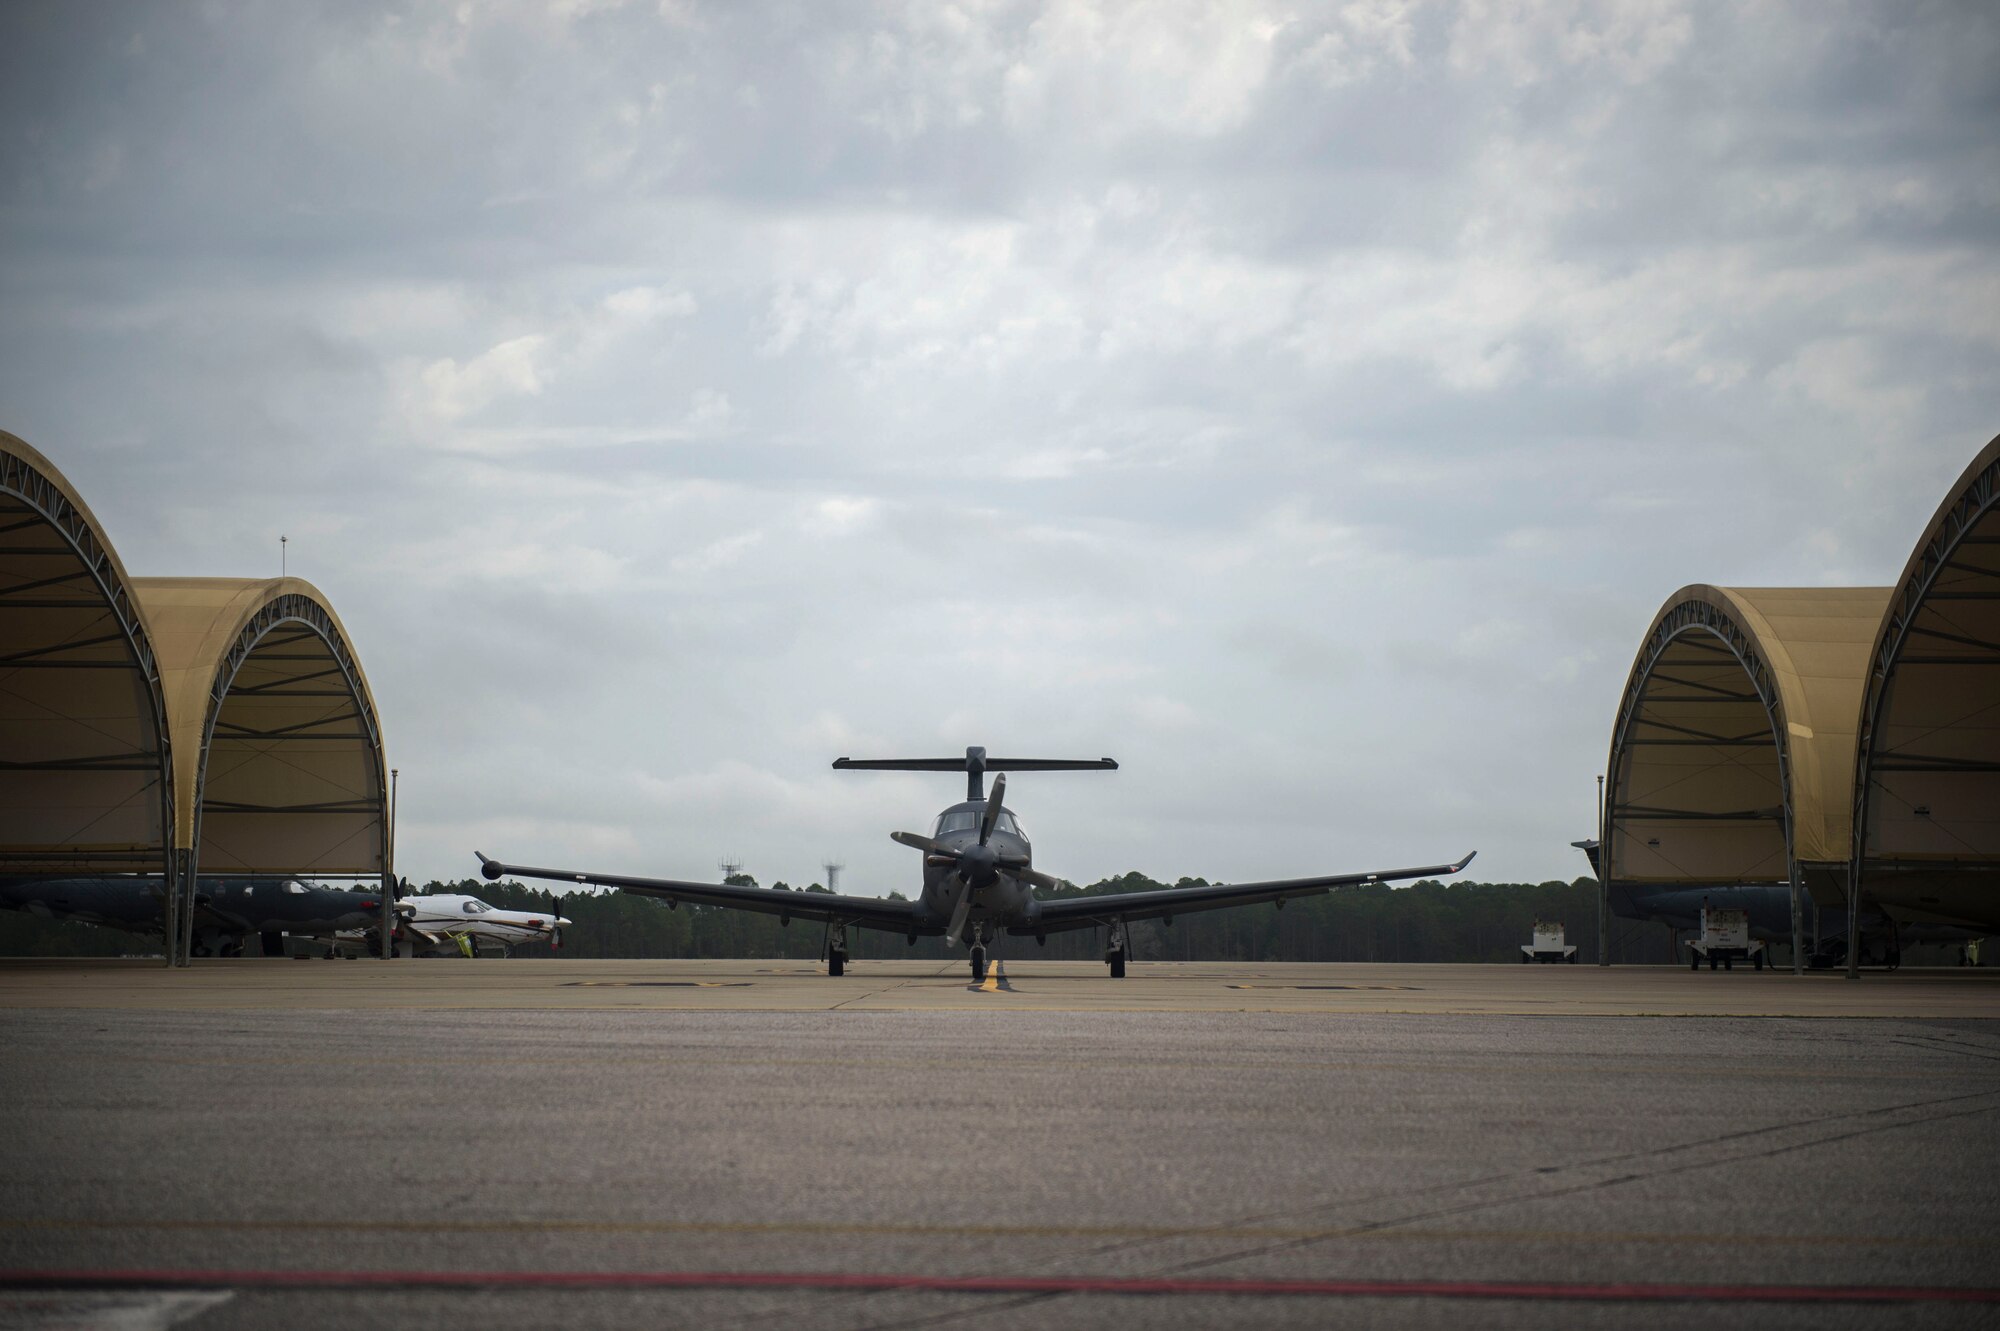 A U-28A aircraft taxies in after completing a mission March 31 at Hurlburt Field, Fla.  Part of the sortie was completion of aircraft mission qualification training by Staff Sgt. Kyle Cook, a tactical system operator with the 28th Intelligence Squadron.  The completion of that training pushed the squadron to its goal of full operational capability more than a year ahead of schedule.  (U.S. Air Force photo/Airman 1st Class Kai White)